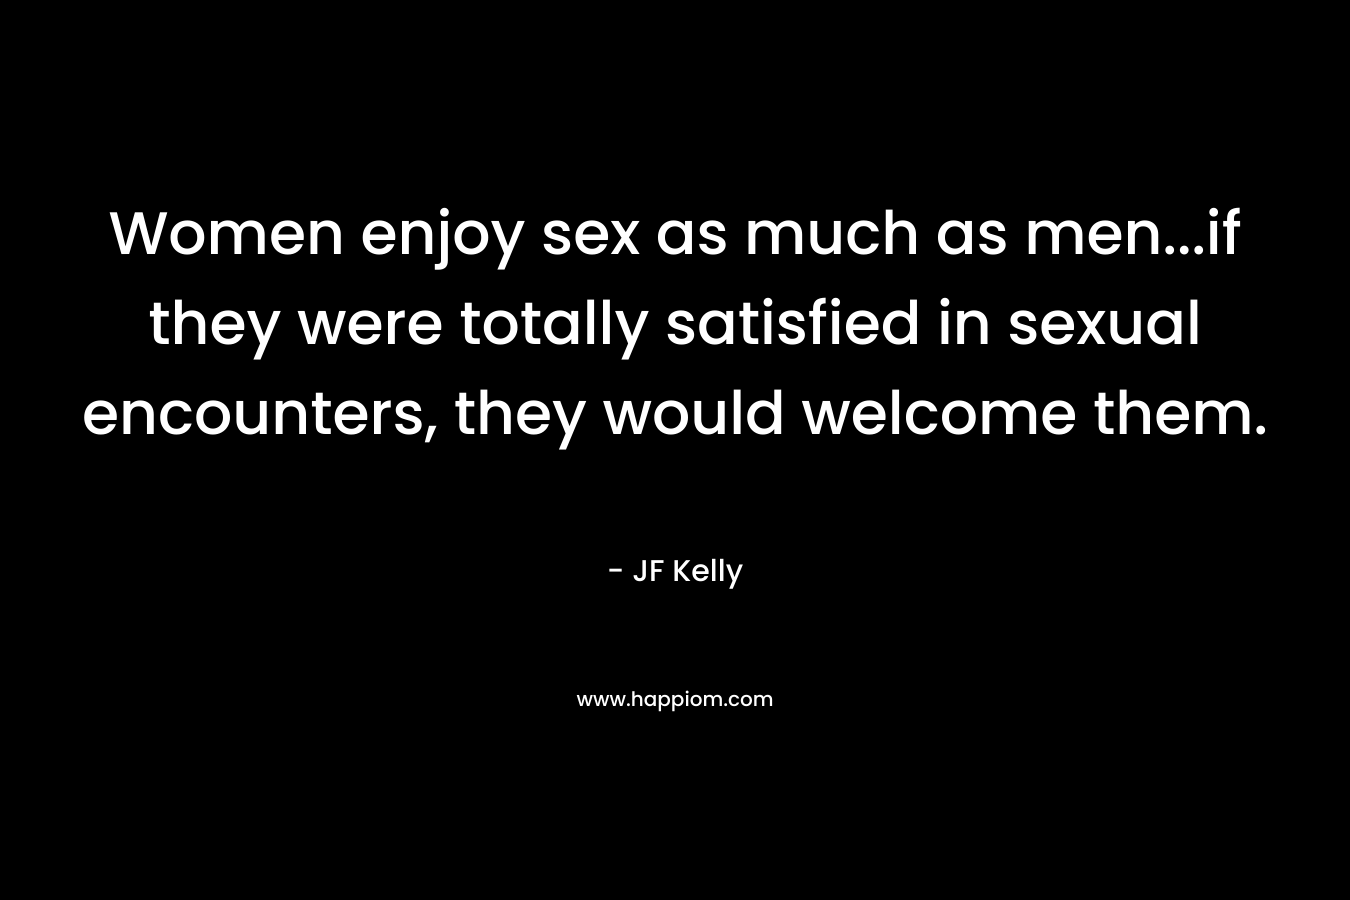 Women enjoy sex as much as men...if they were totally satisfied in sexual encounters, they would welcome them.